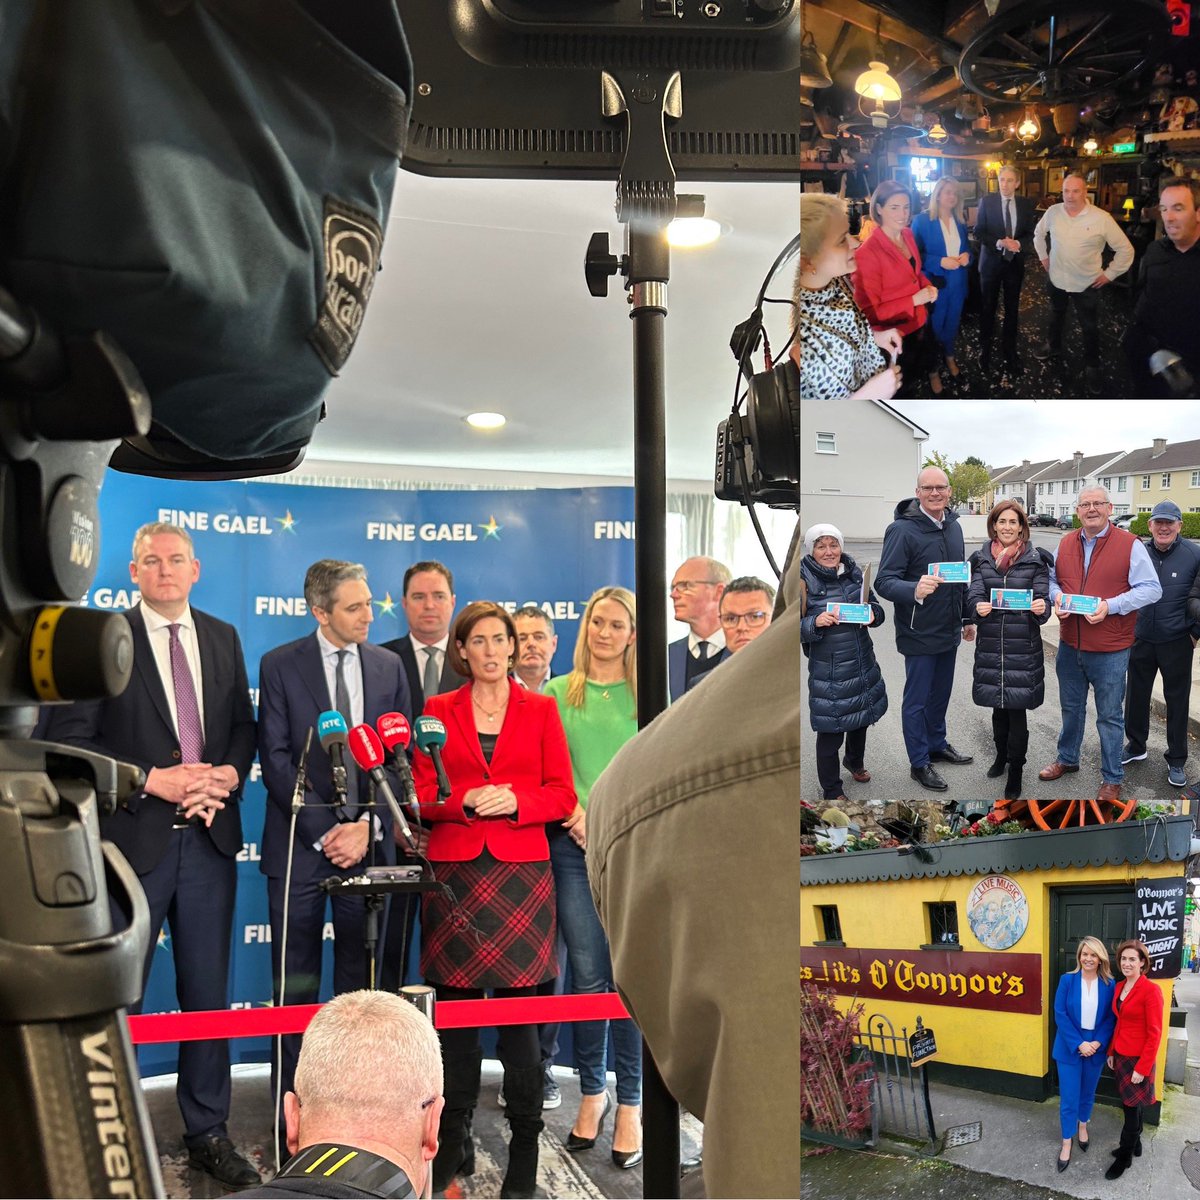 Great to kickstart the weekend in Galway, the capital of the West, campaigning with @CloHiggins, @fahy_frank, @MariaWalshEU, @SeanKyneGalway & @SimonHarrisTD. Fantastic buzz about the place ahead of the @FineGael Ard Fheis taking place tomorrow in @uniofgalway